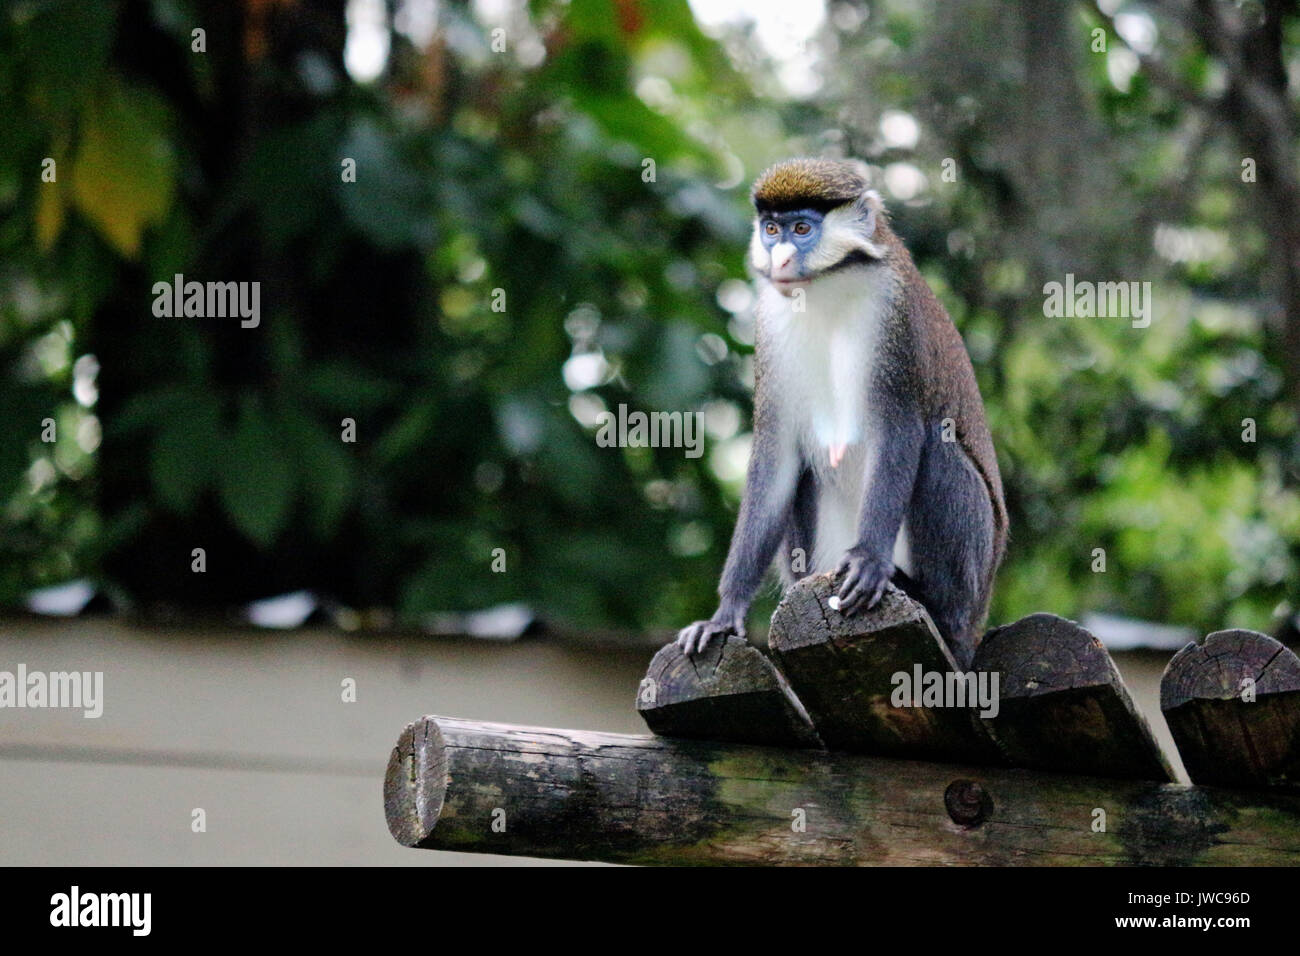 A Red Tailed Monkey Sits on His Platform . Stock Photo